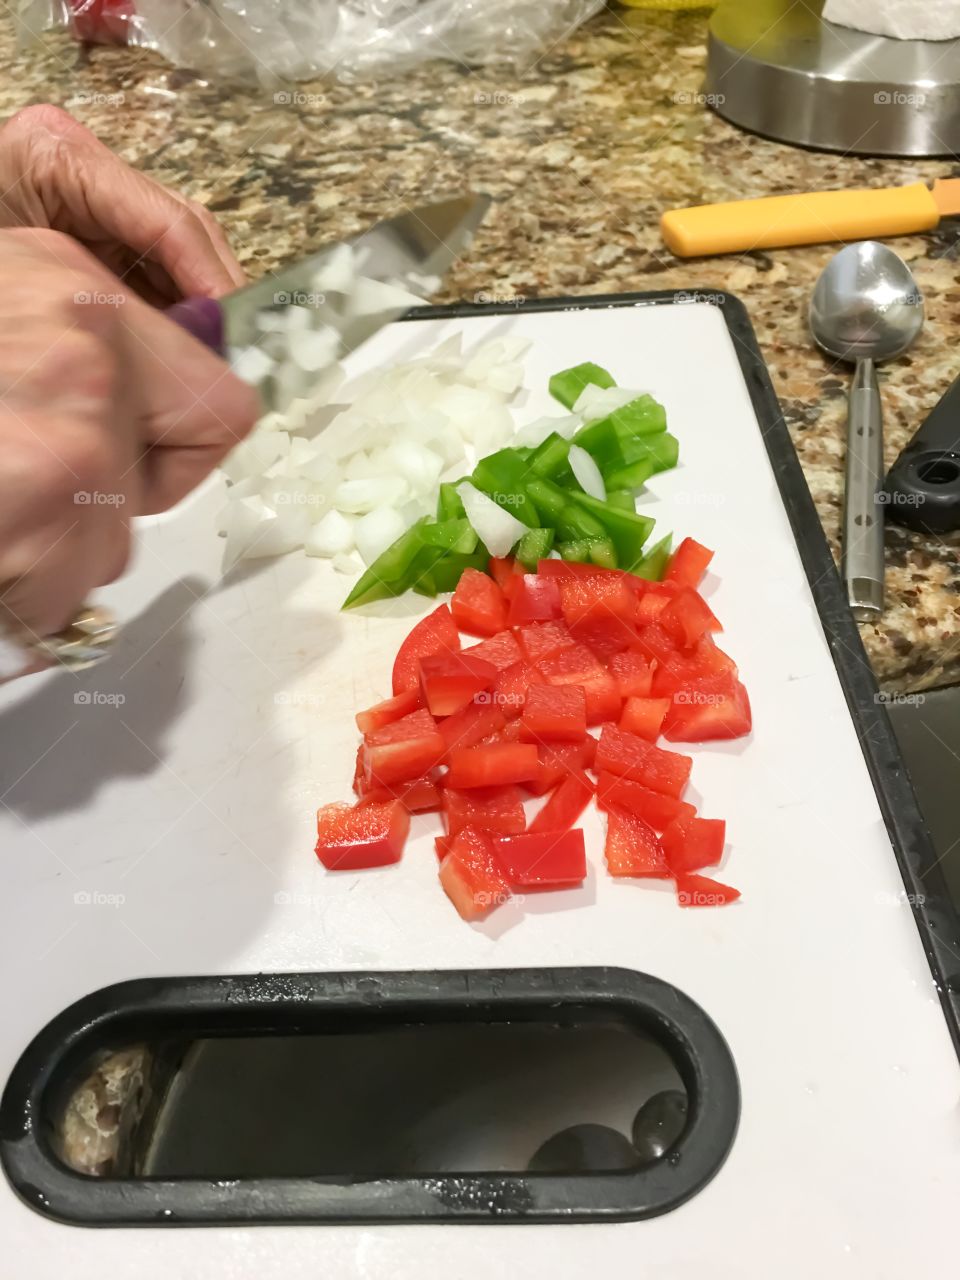 Home chef cutting capsicum sweet bell peppers and onions on cutting board hands showing